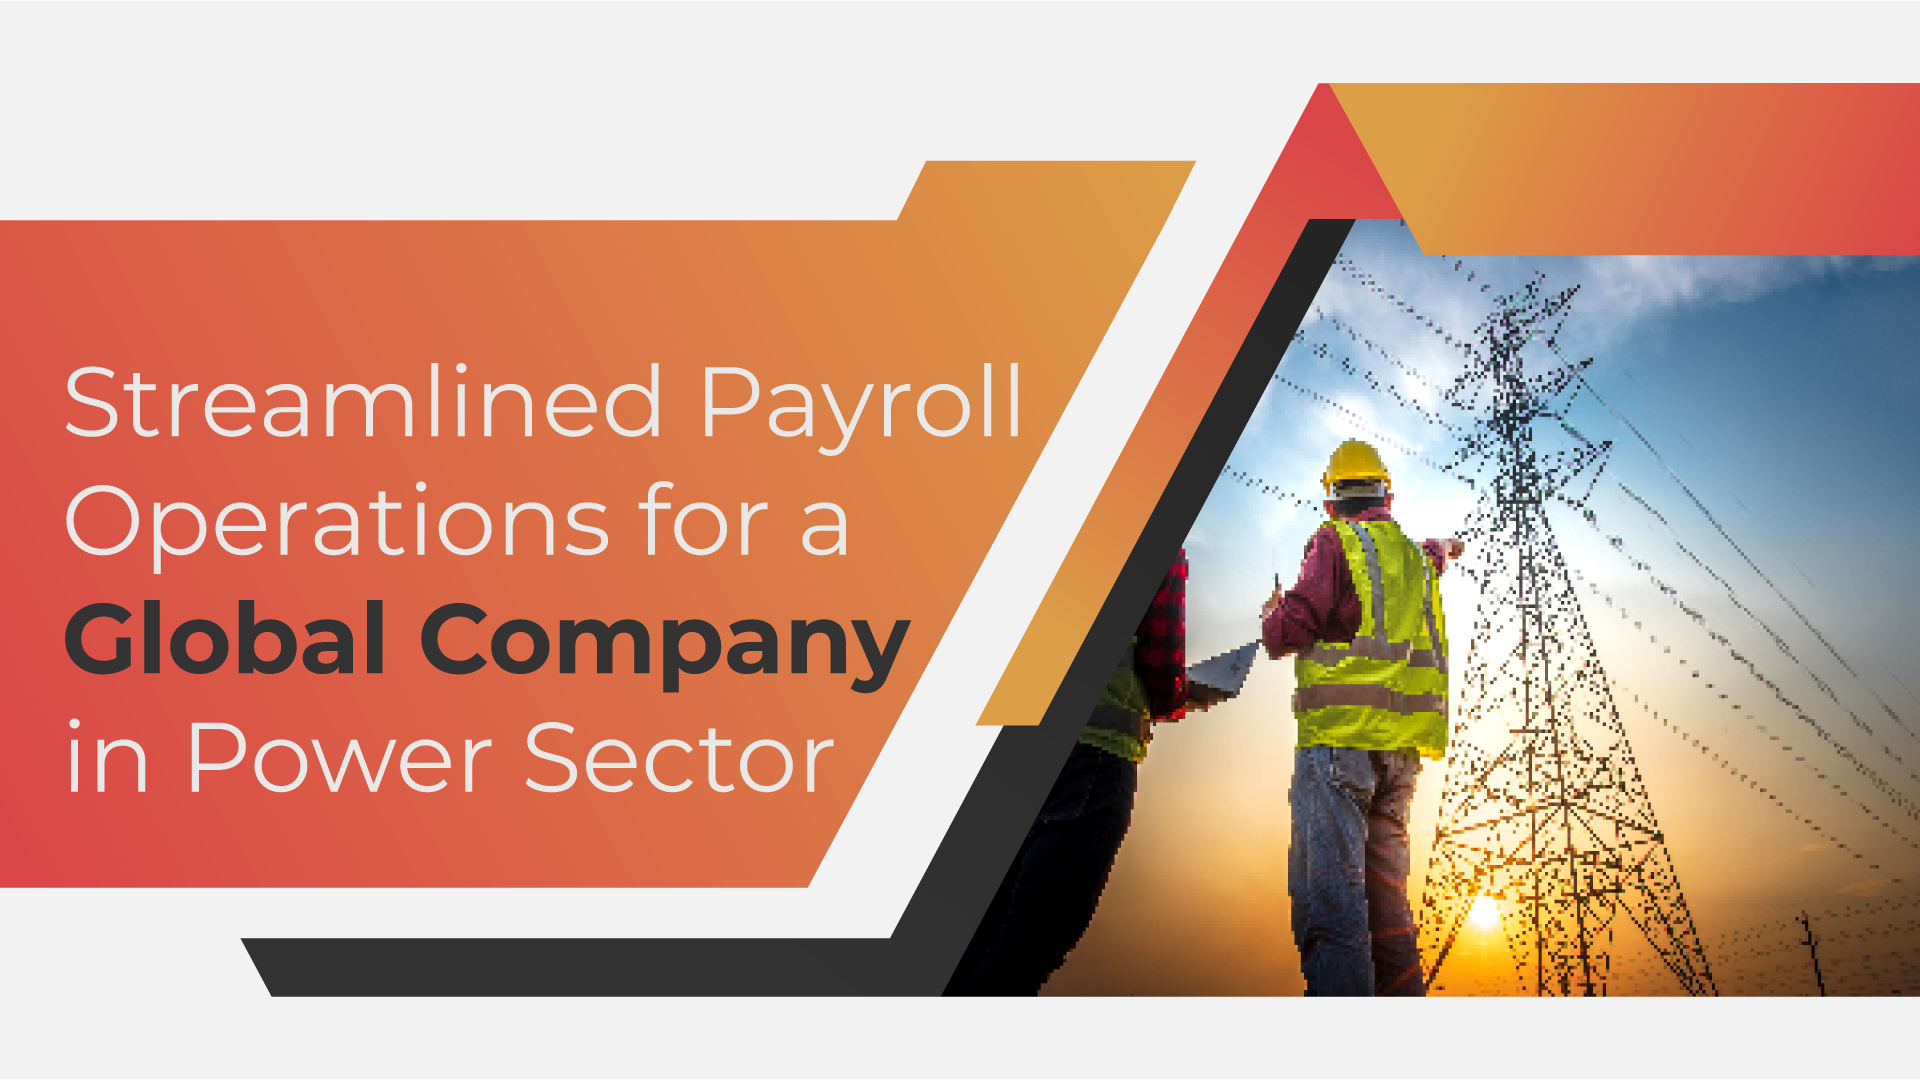 Streamlined Payroll Operations for a Global Company in Power Sector